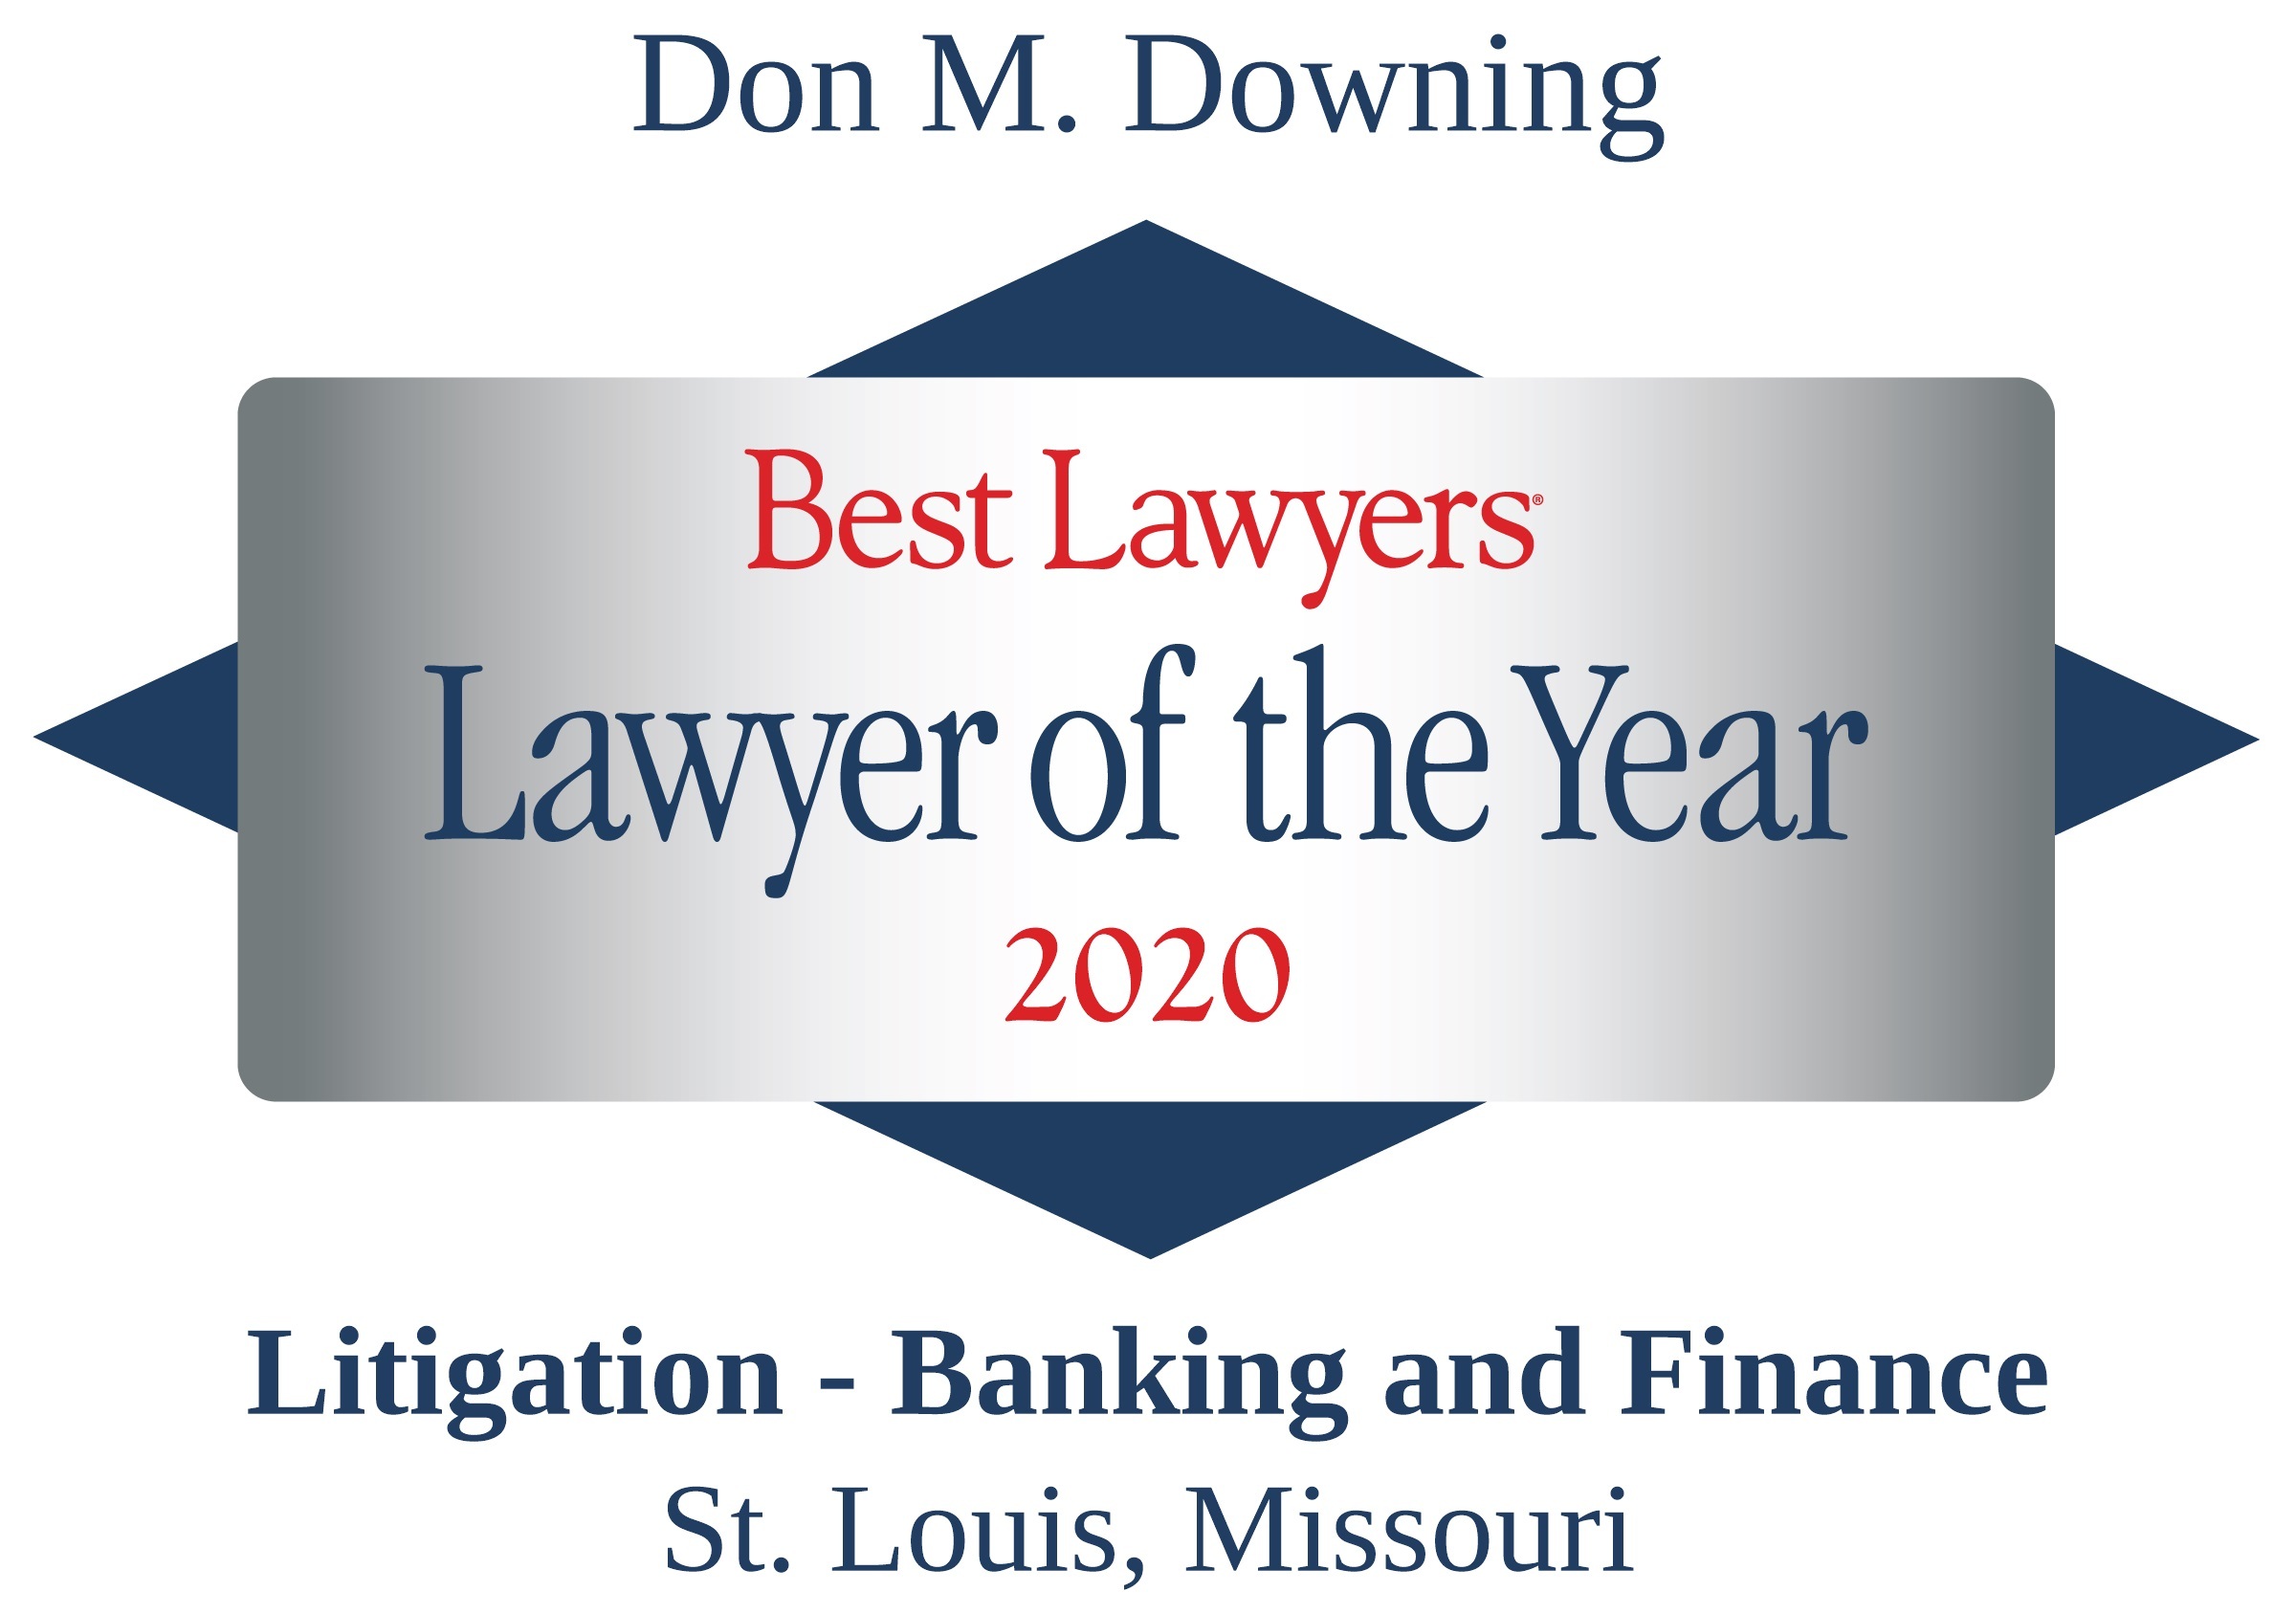 Don Downing Lawyer of the Year 2020 badge